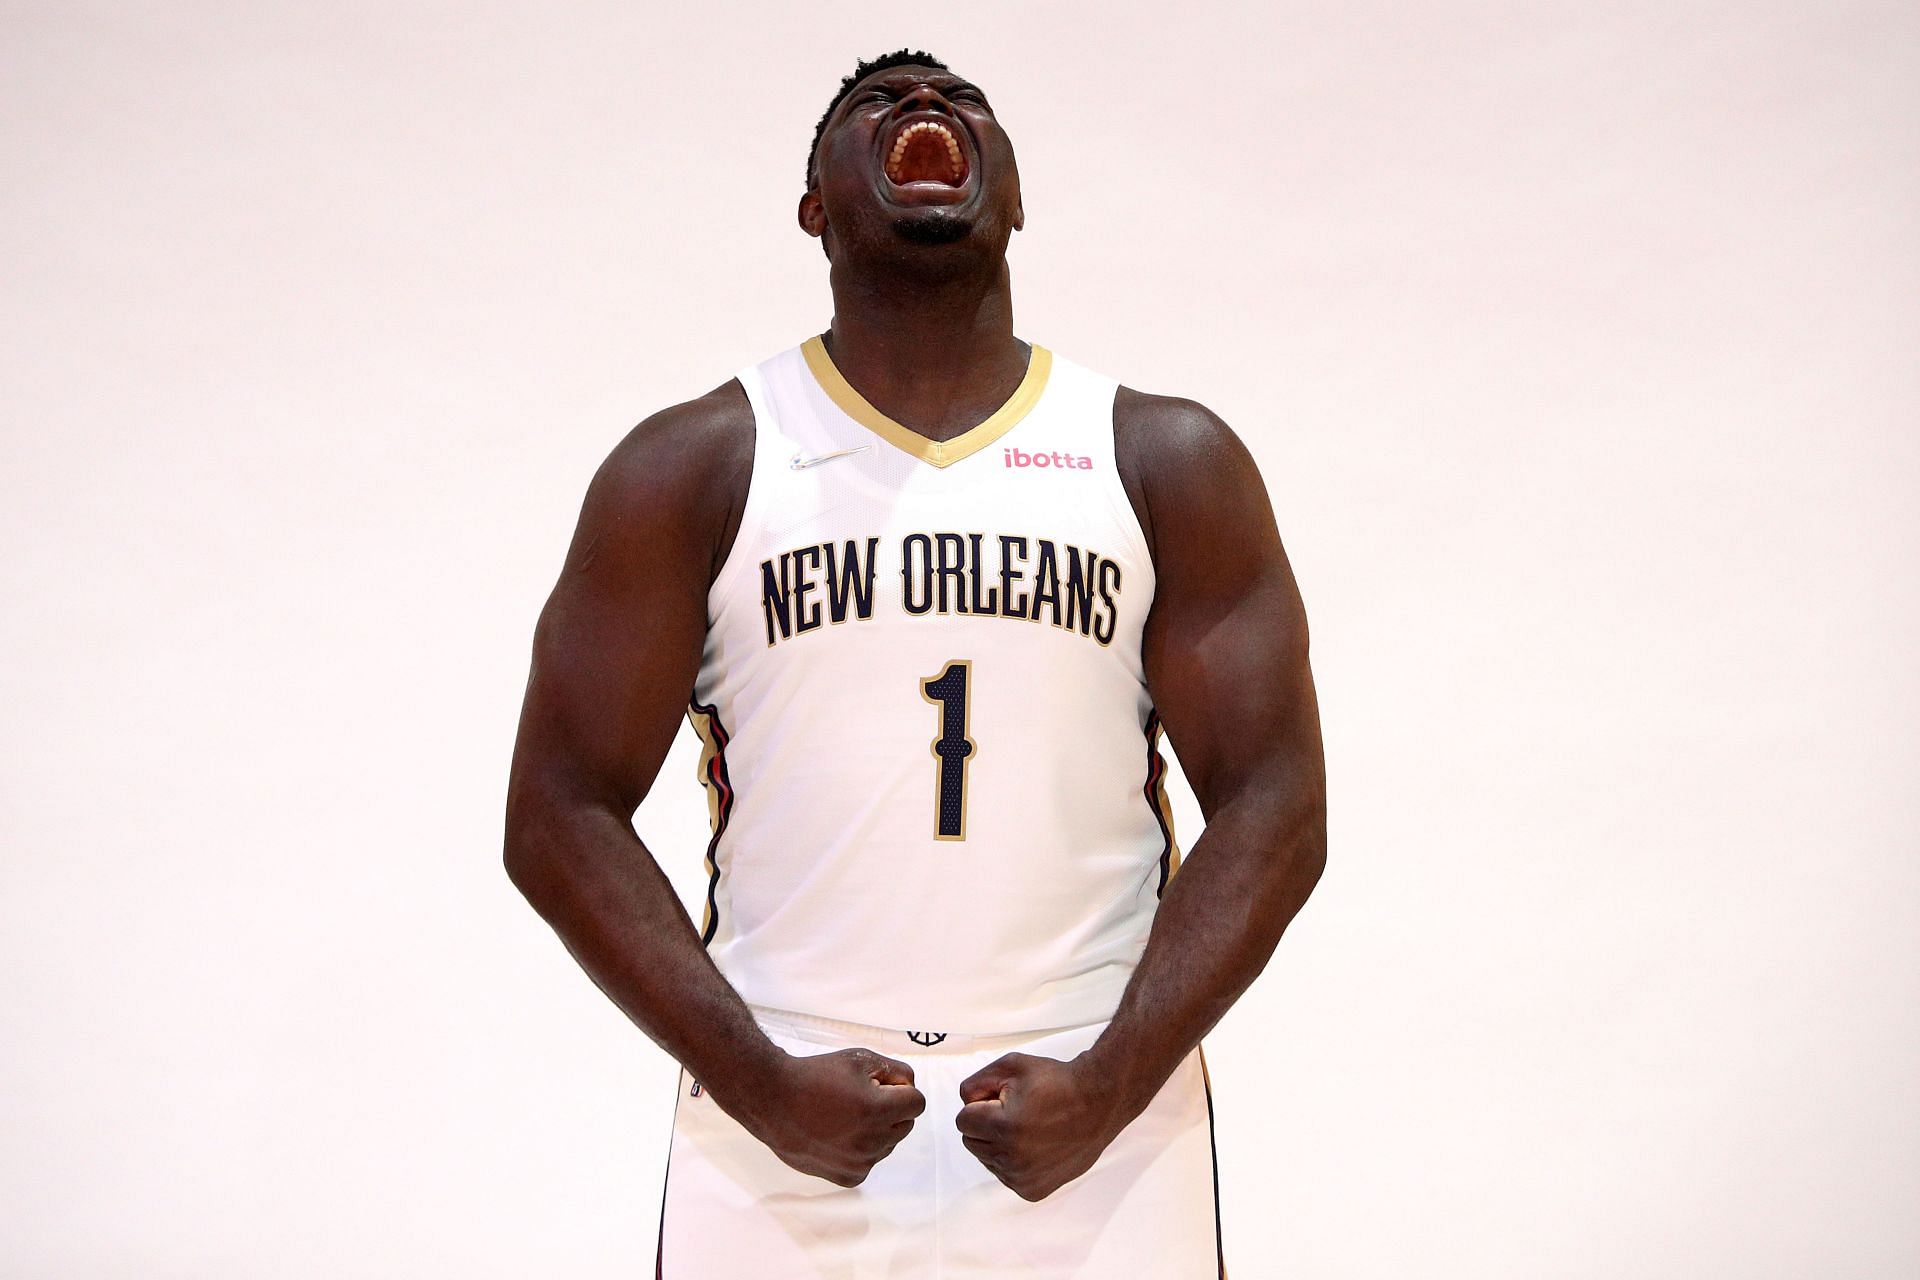 Zion Williamson of the New Orleans Pelicans.